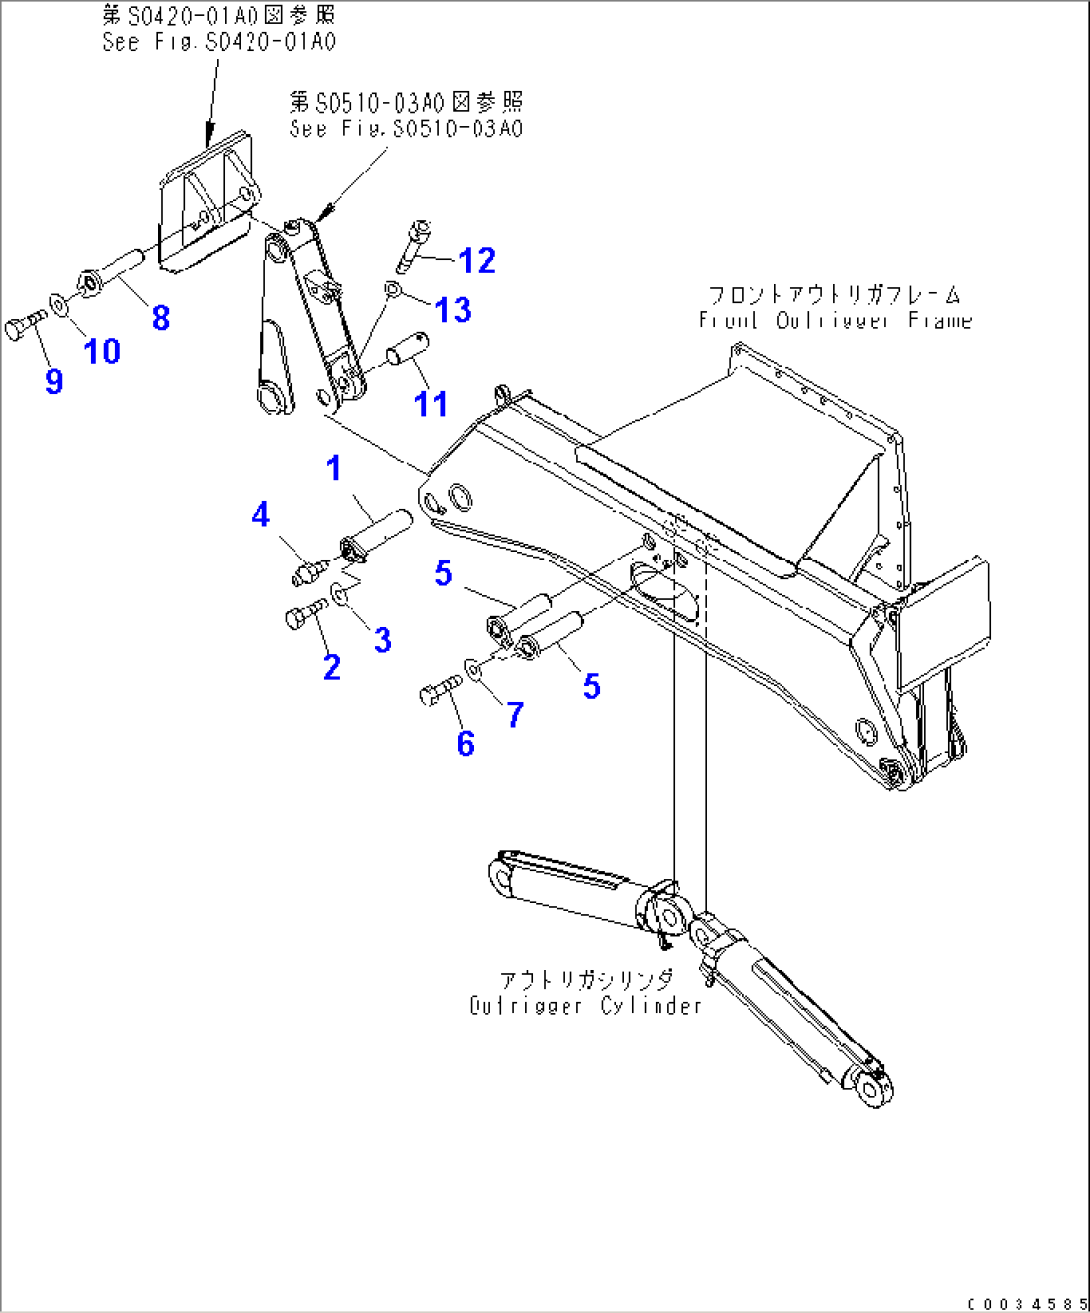 FRONT OUTRIGGER (PIN)